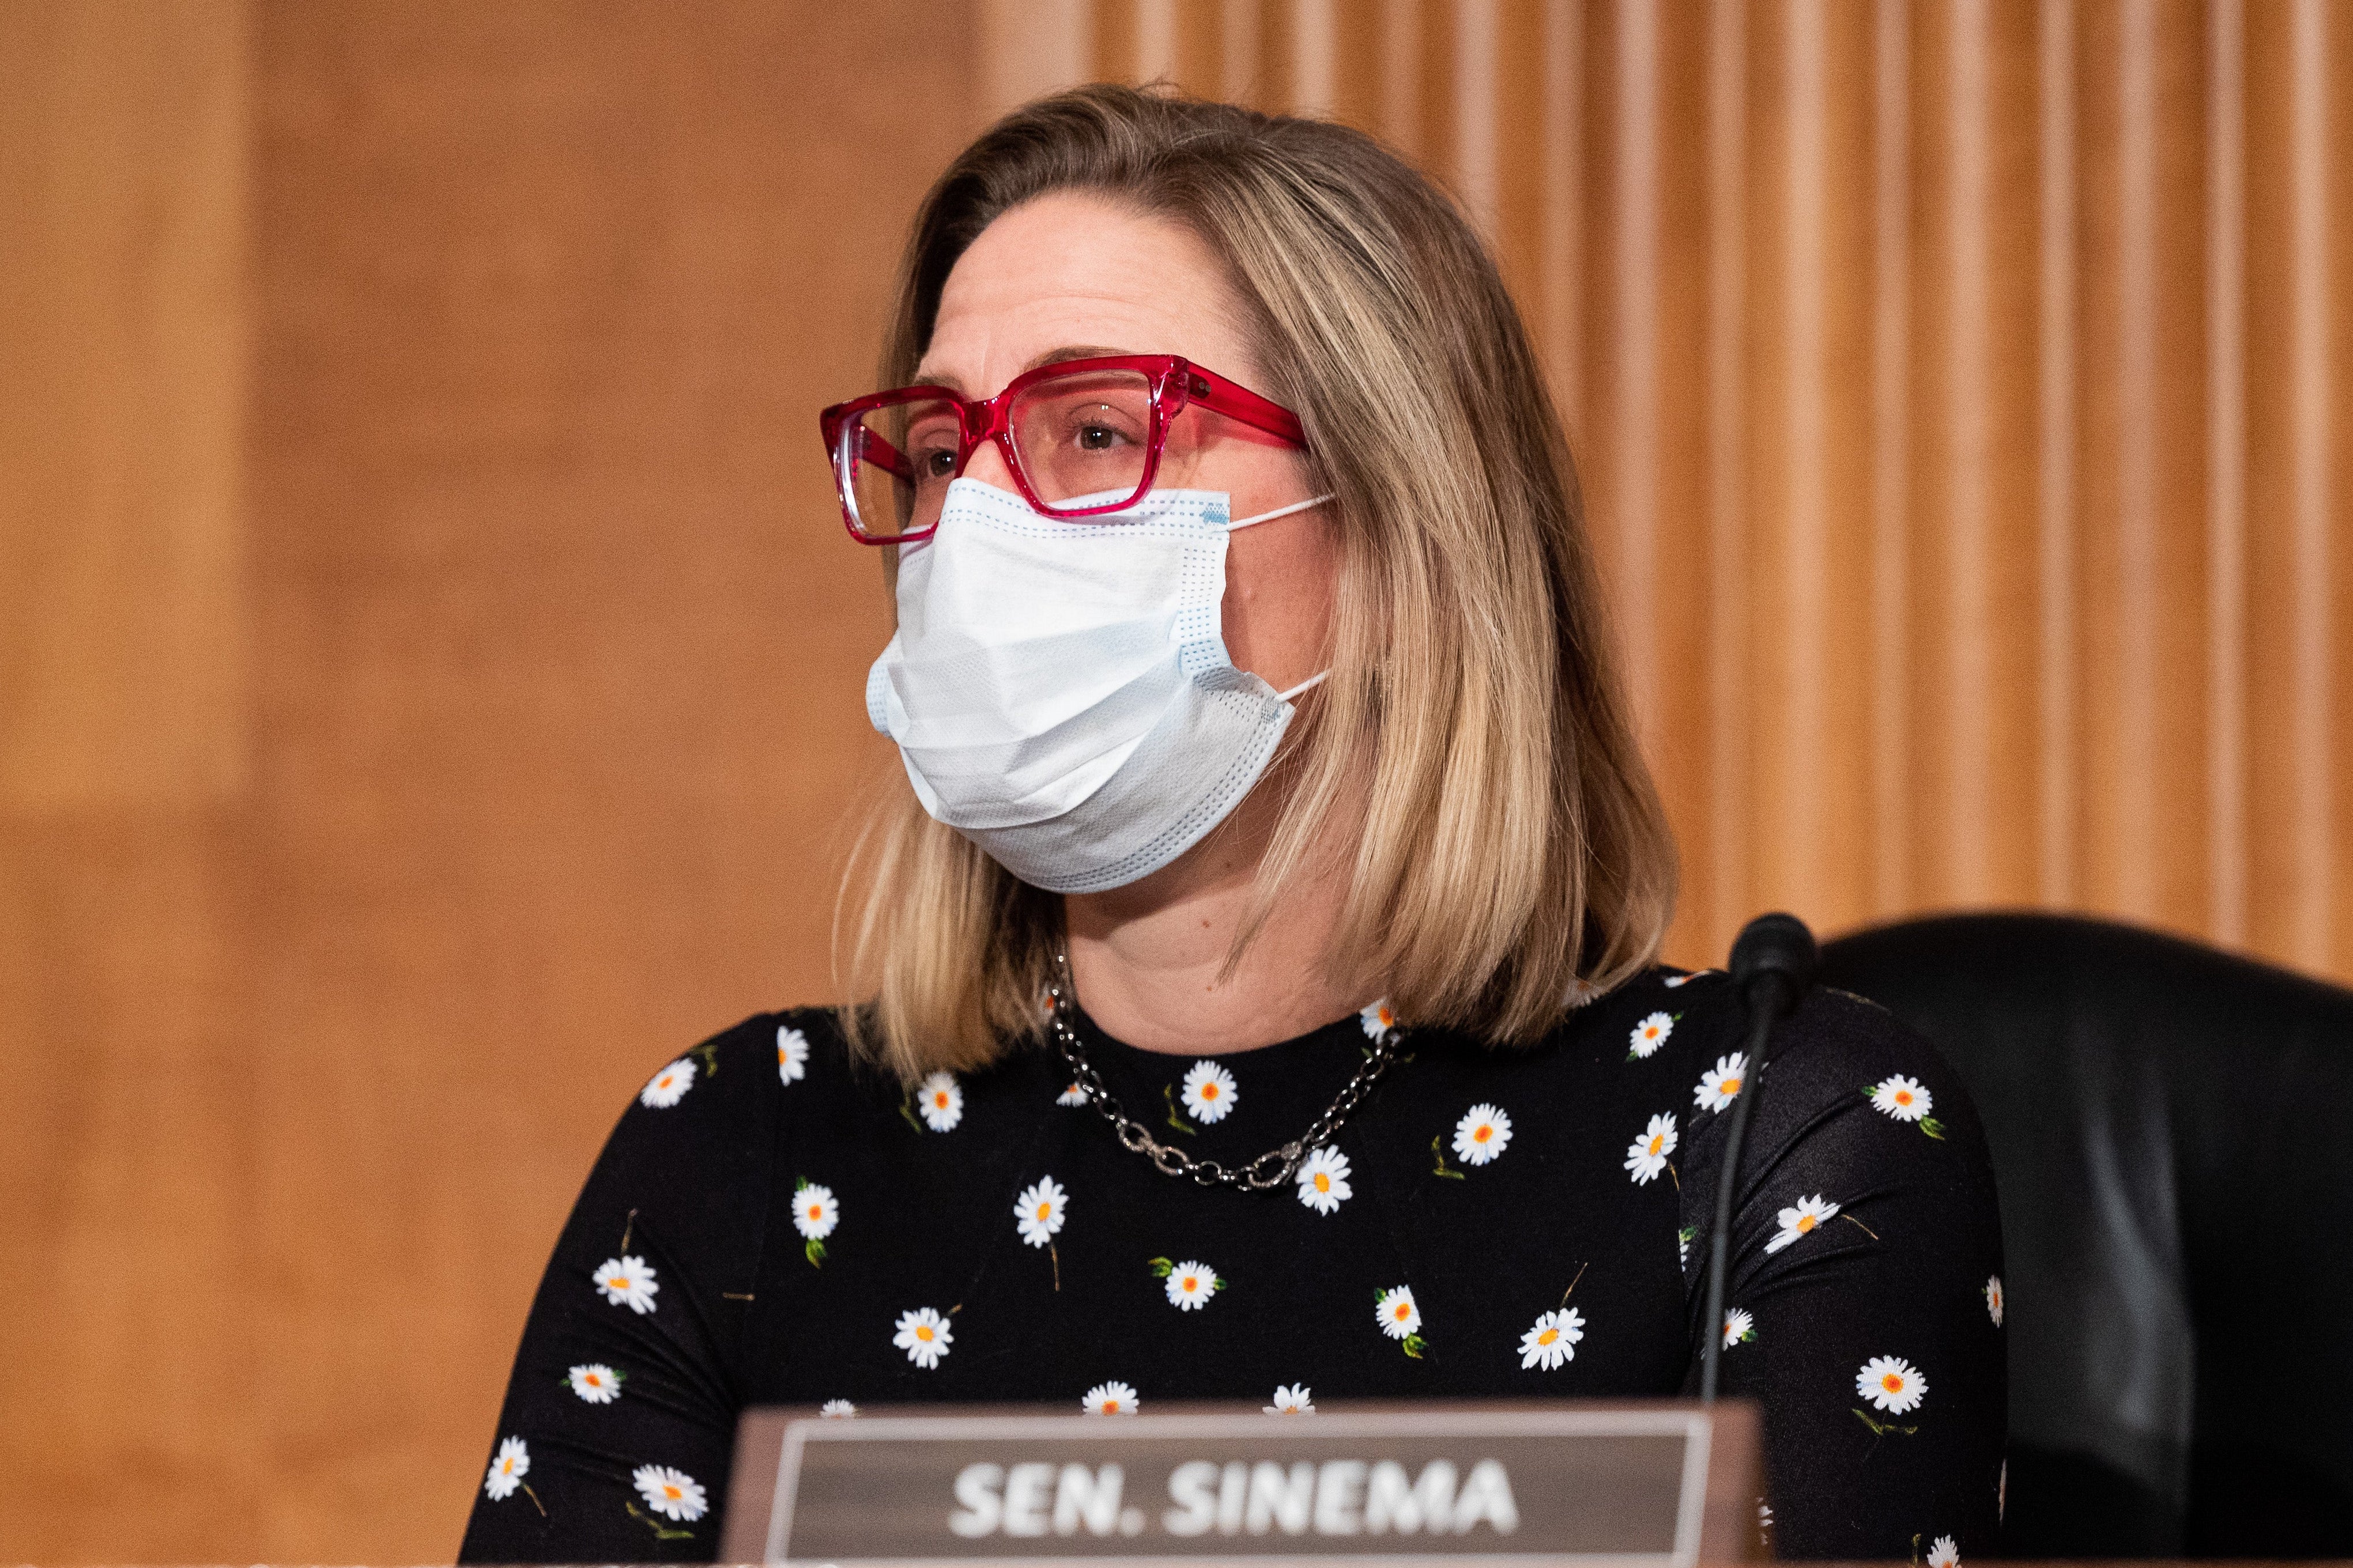 Sen. Kyrsten Sinema in a mask at a dais with a name placard in front of her